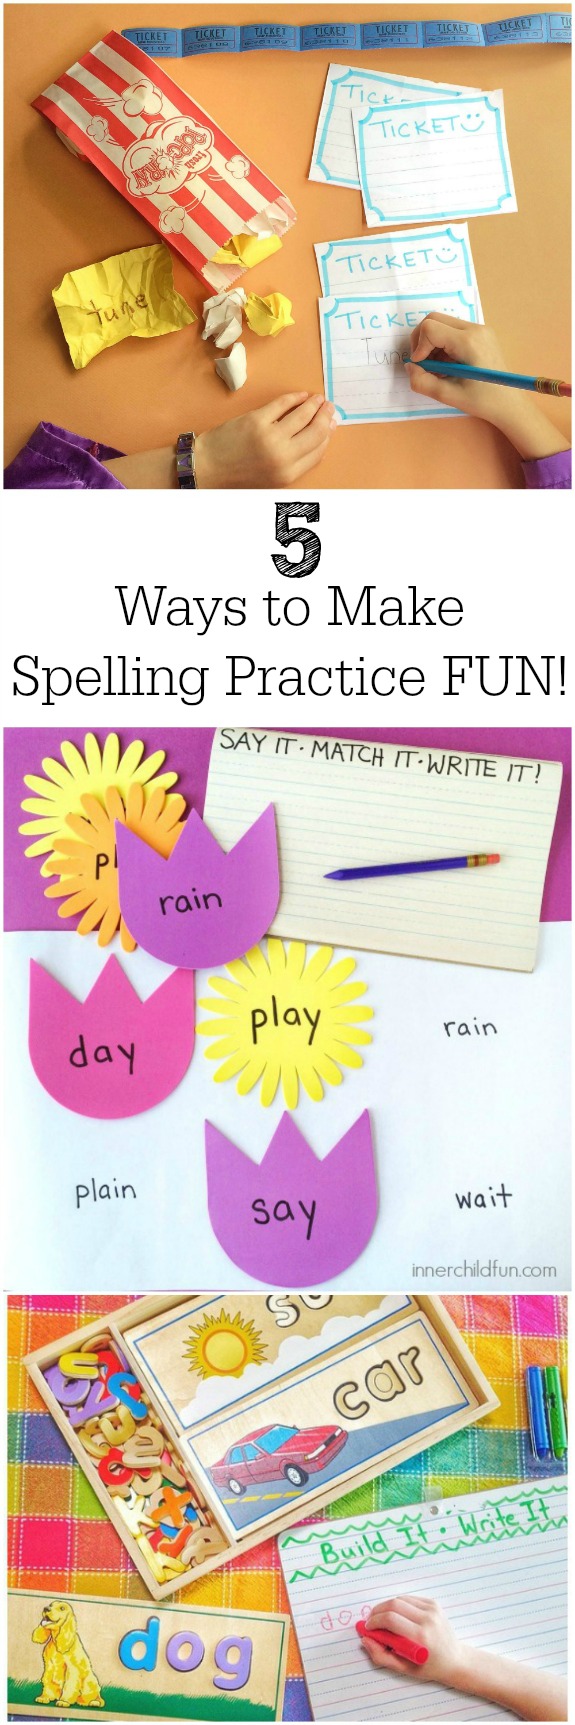 5 Fun Ways to Practice Spelling Words -- love these ideas!